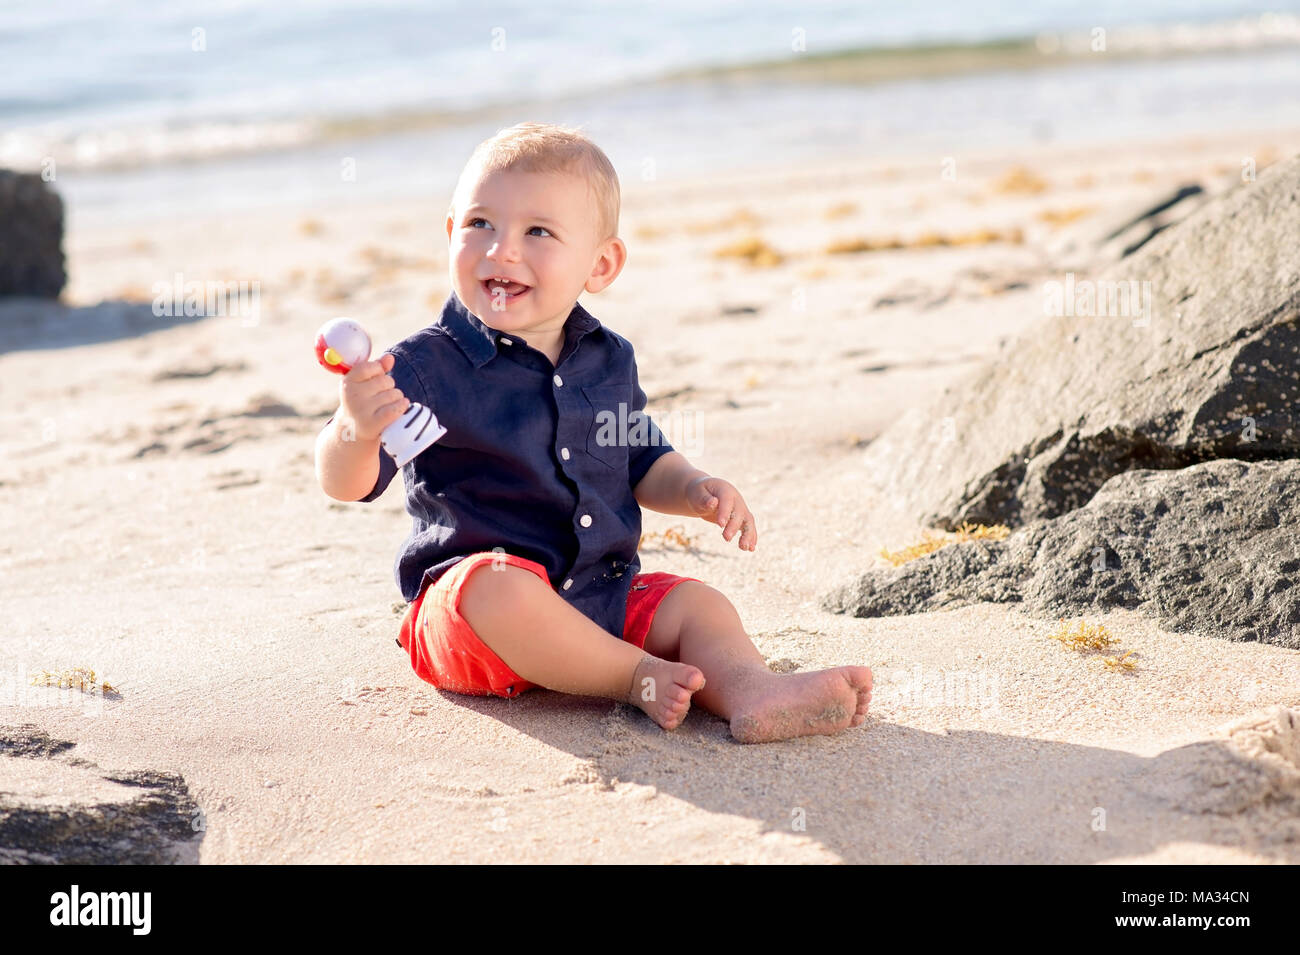 A one year old baby boy sitting on a beach and playing with a shaker toy. Stock Photo